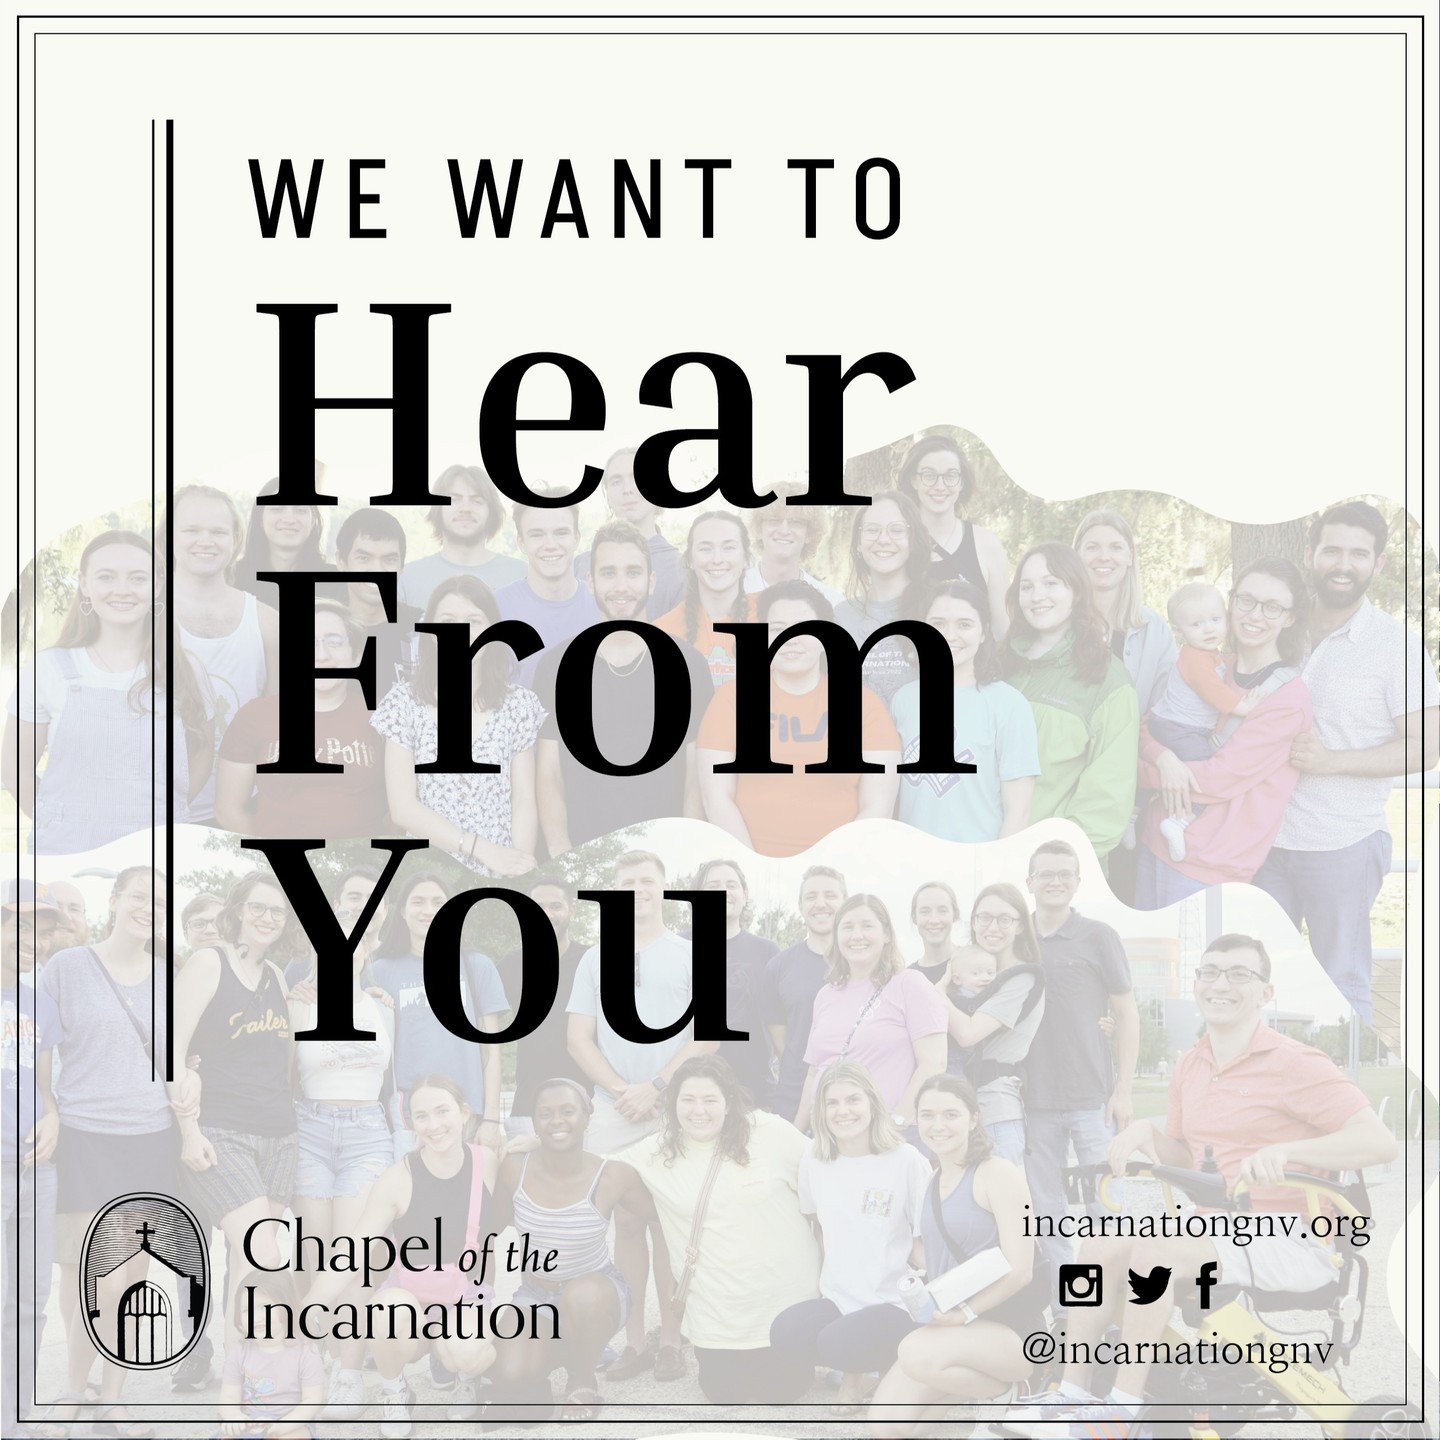 We're starting to plan for the Fall at Chapel of the Incarnation and we want to hear from you! Please fill out the survey in our LinkTree (which can also be found at https://tinyurl.com/chapelplanning) to help us out.